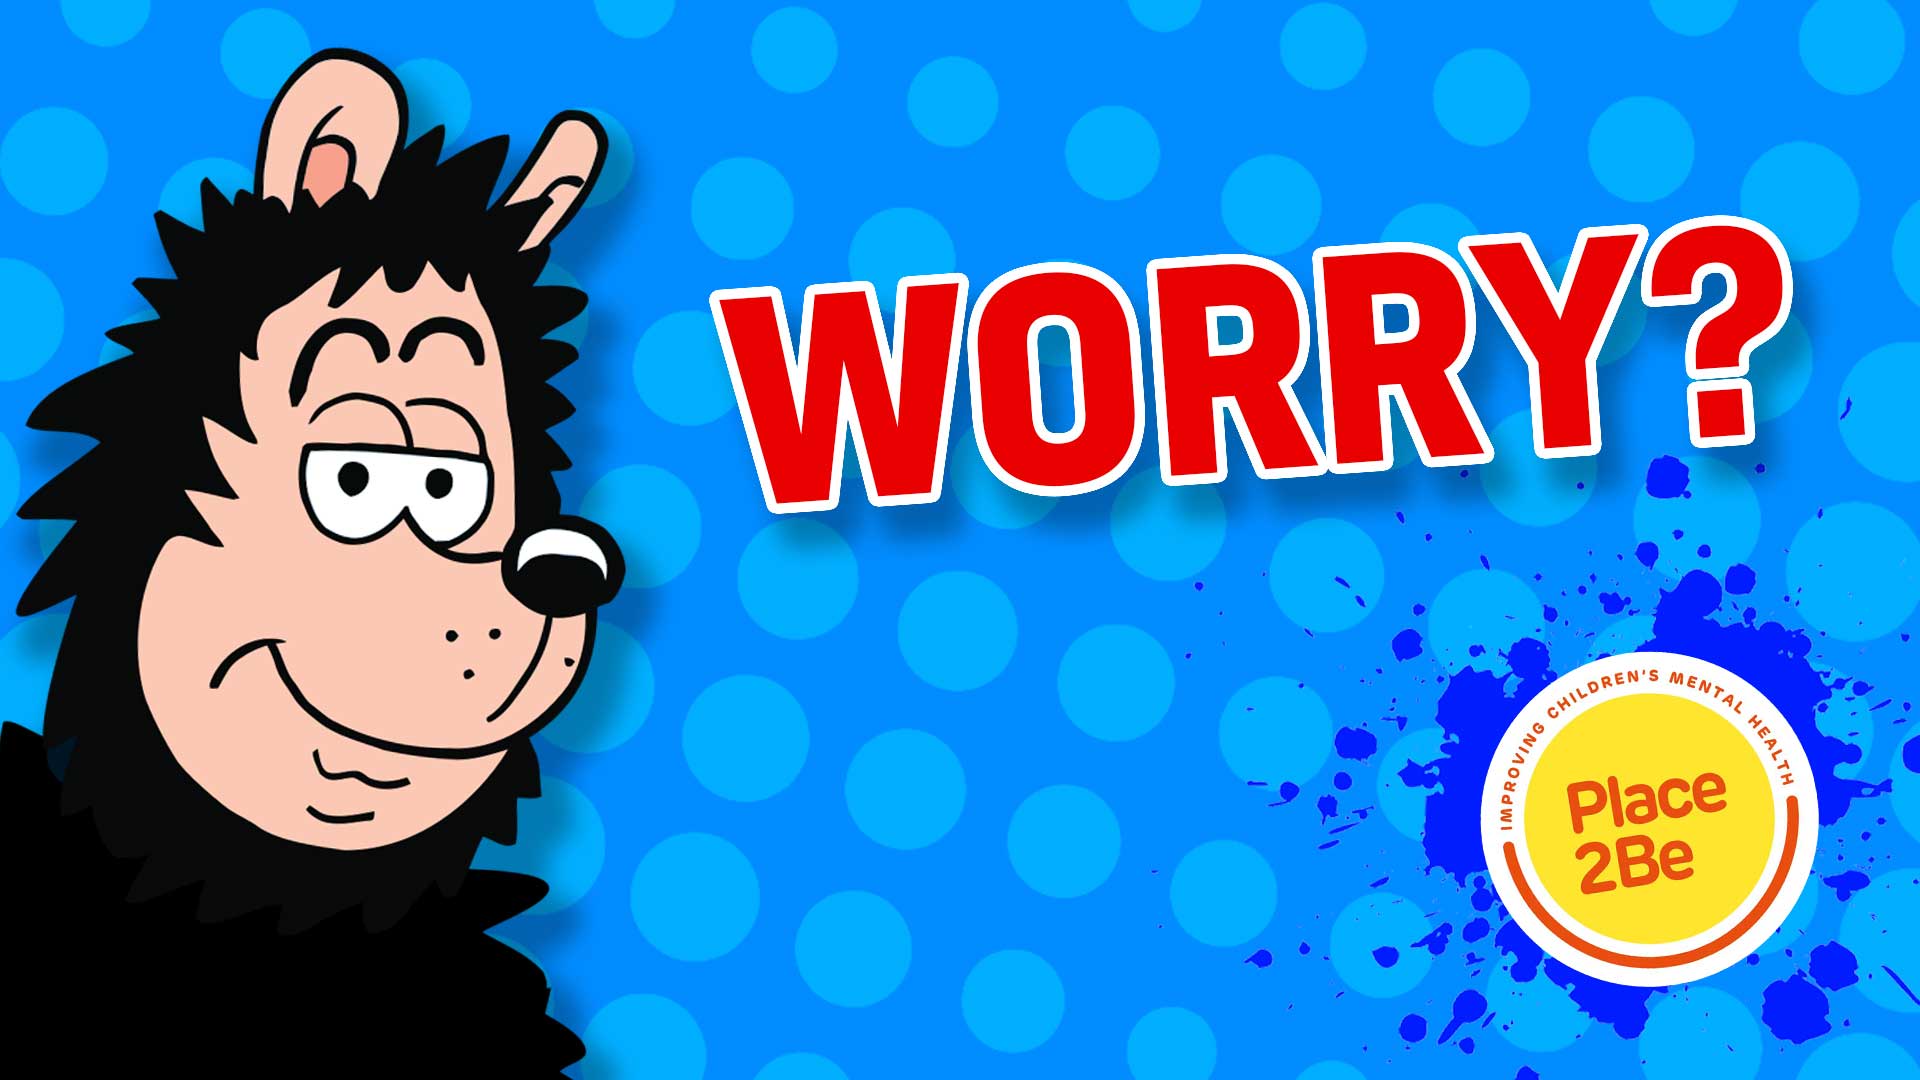 Result: Worry?